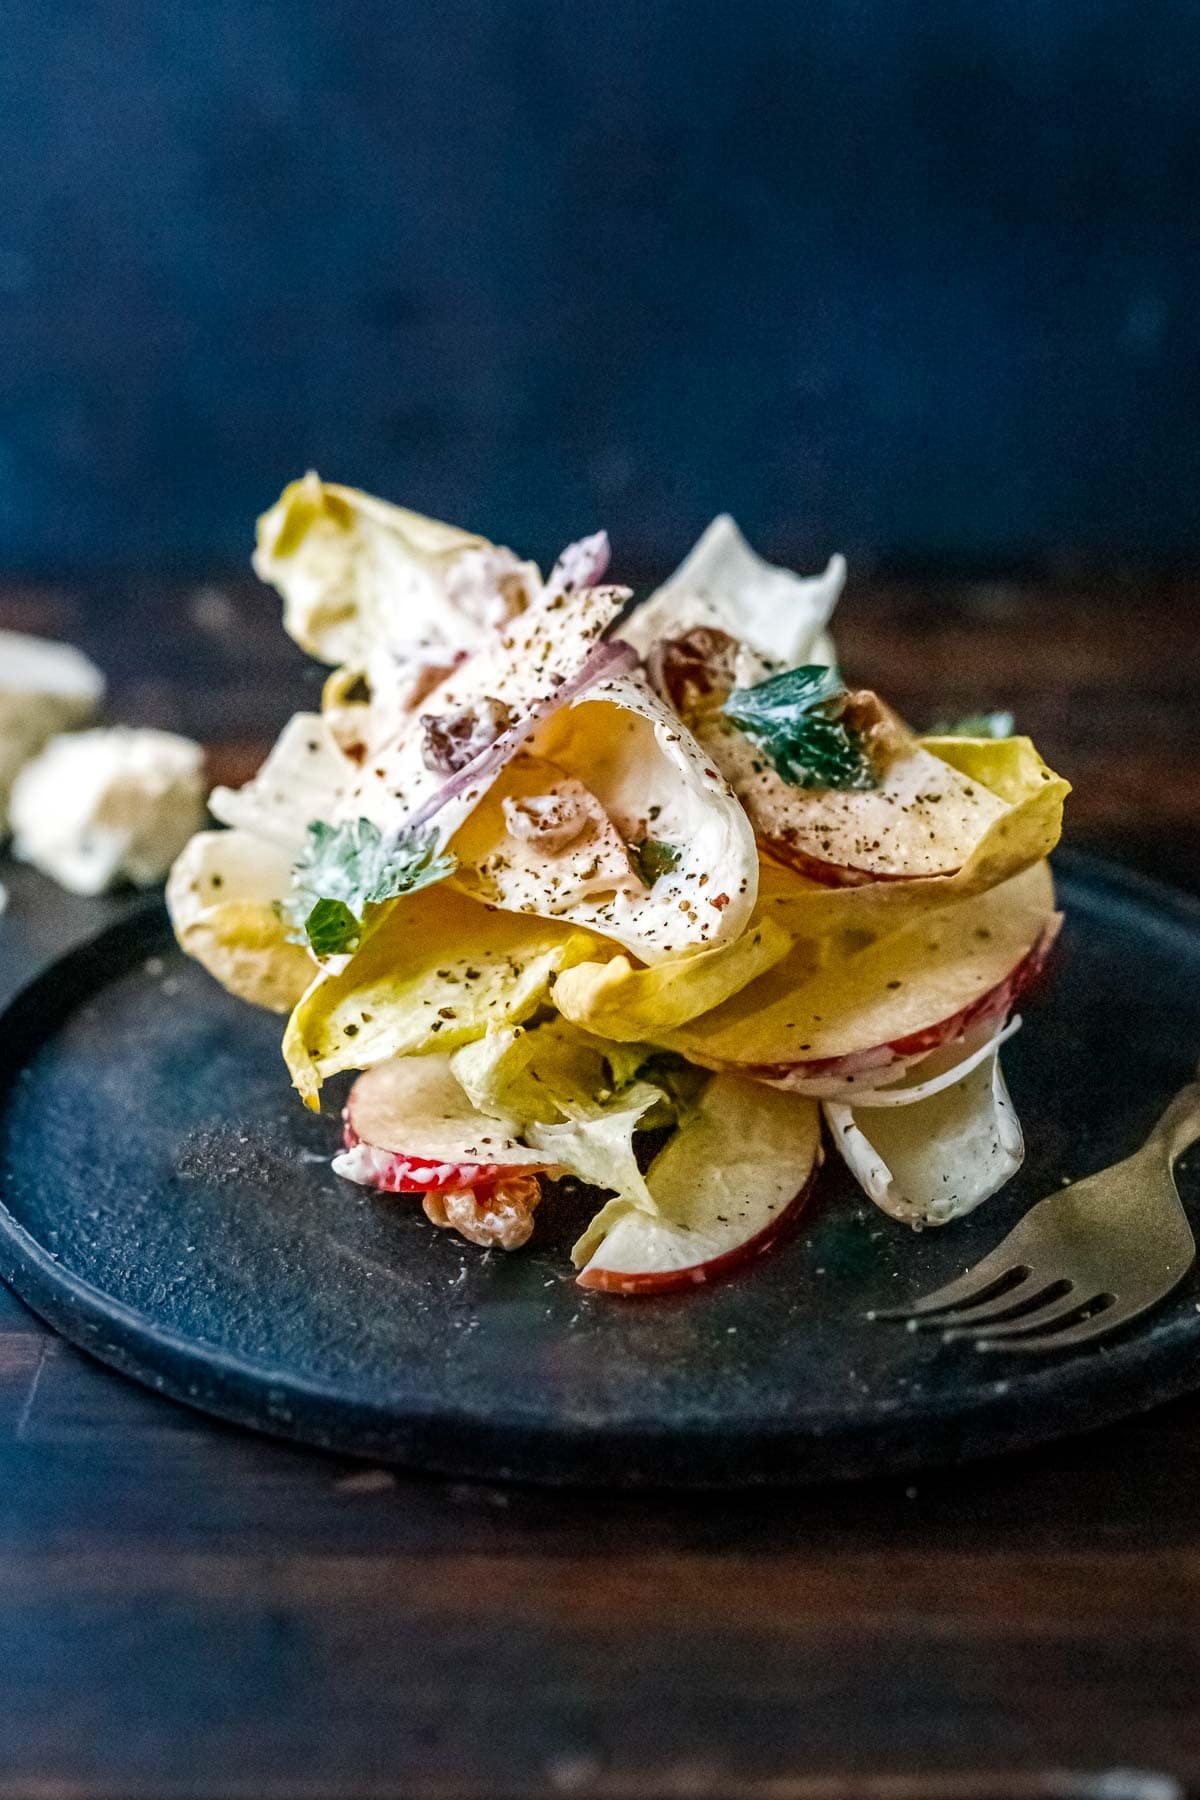 endive salad stacked on plate with blue cheese dressing, apples, red onion, toasted walnuts, parsley, black pepper.